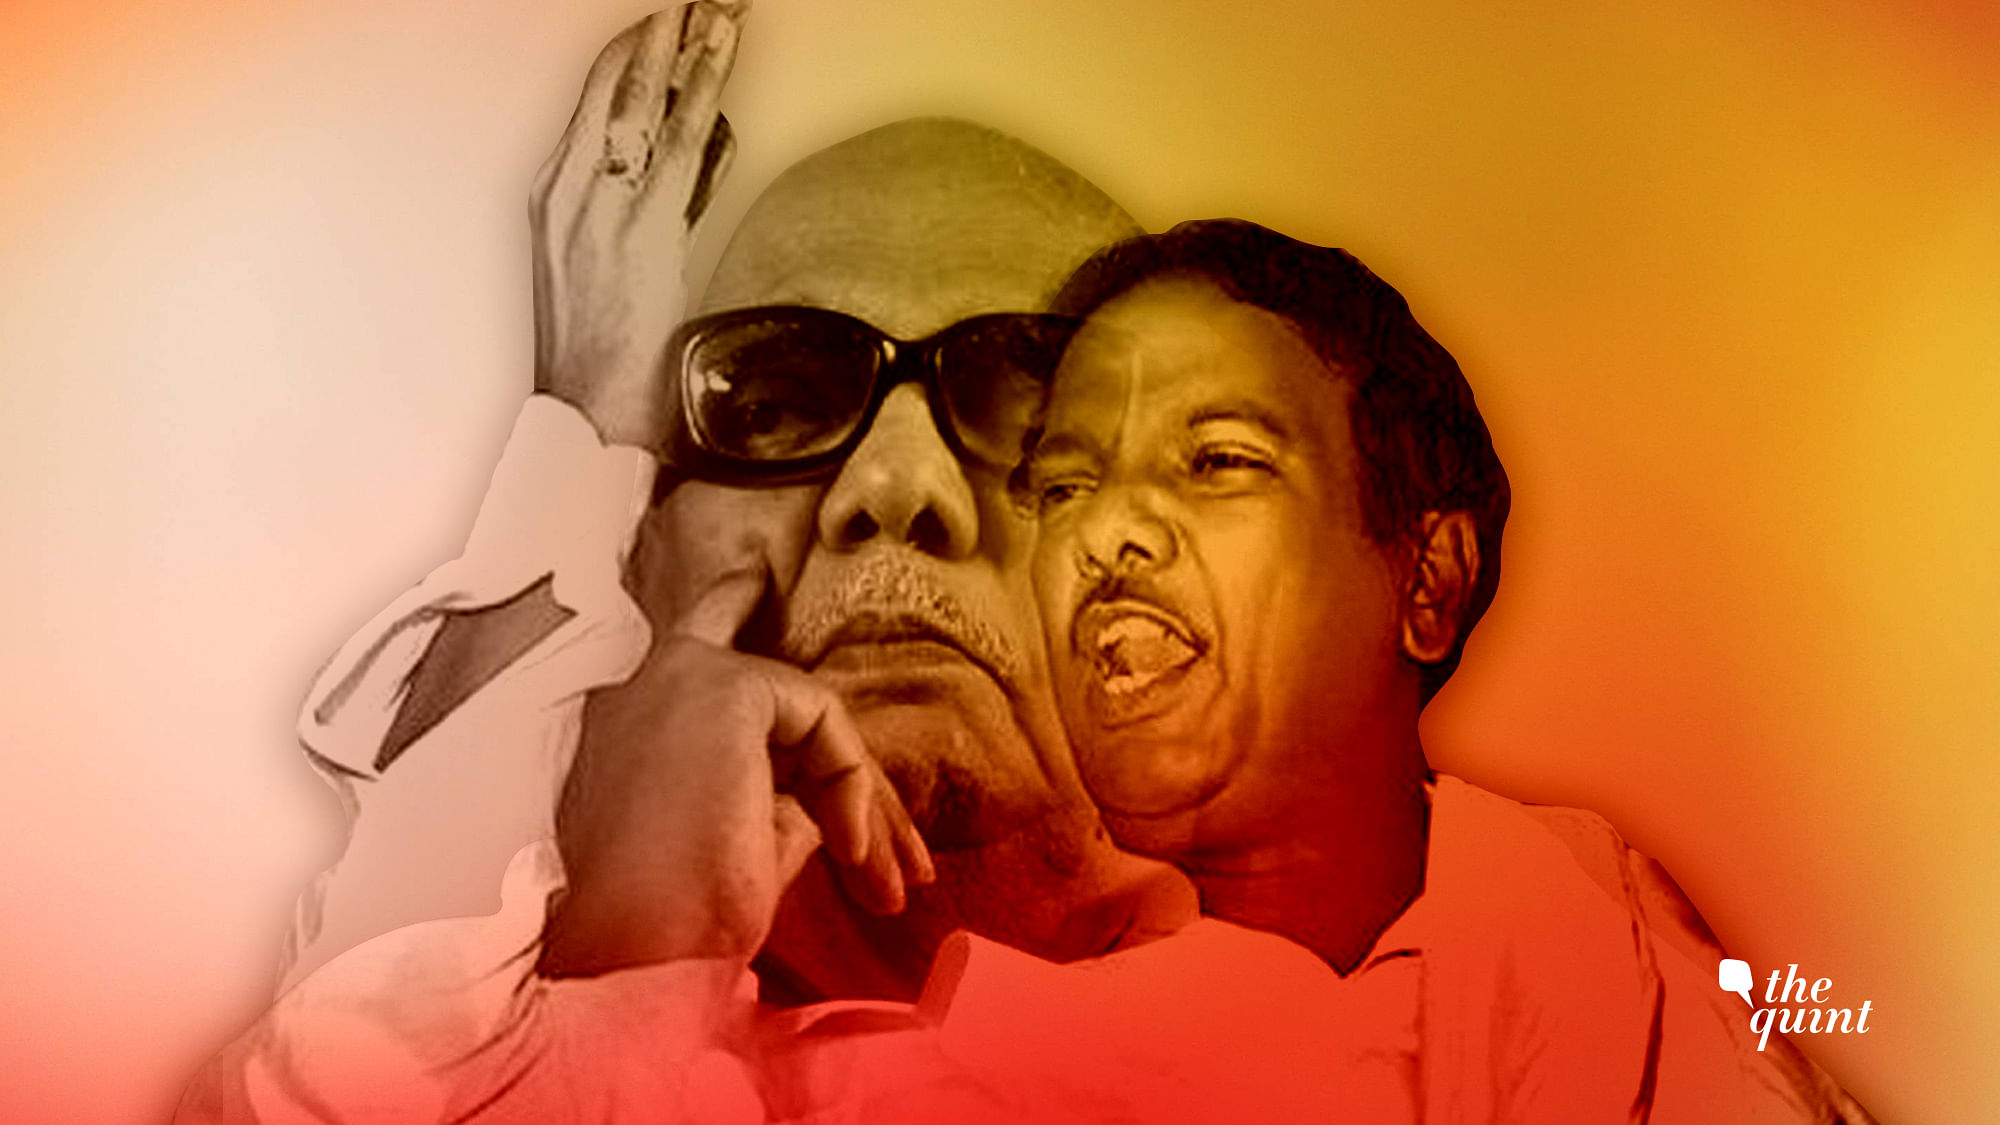 Muthuvel Karunanidhi died after a prolonged illness at the age of 94.&nbsp;